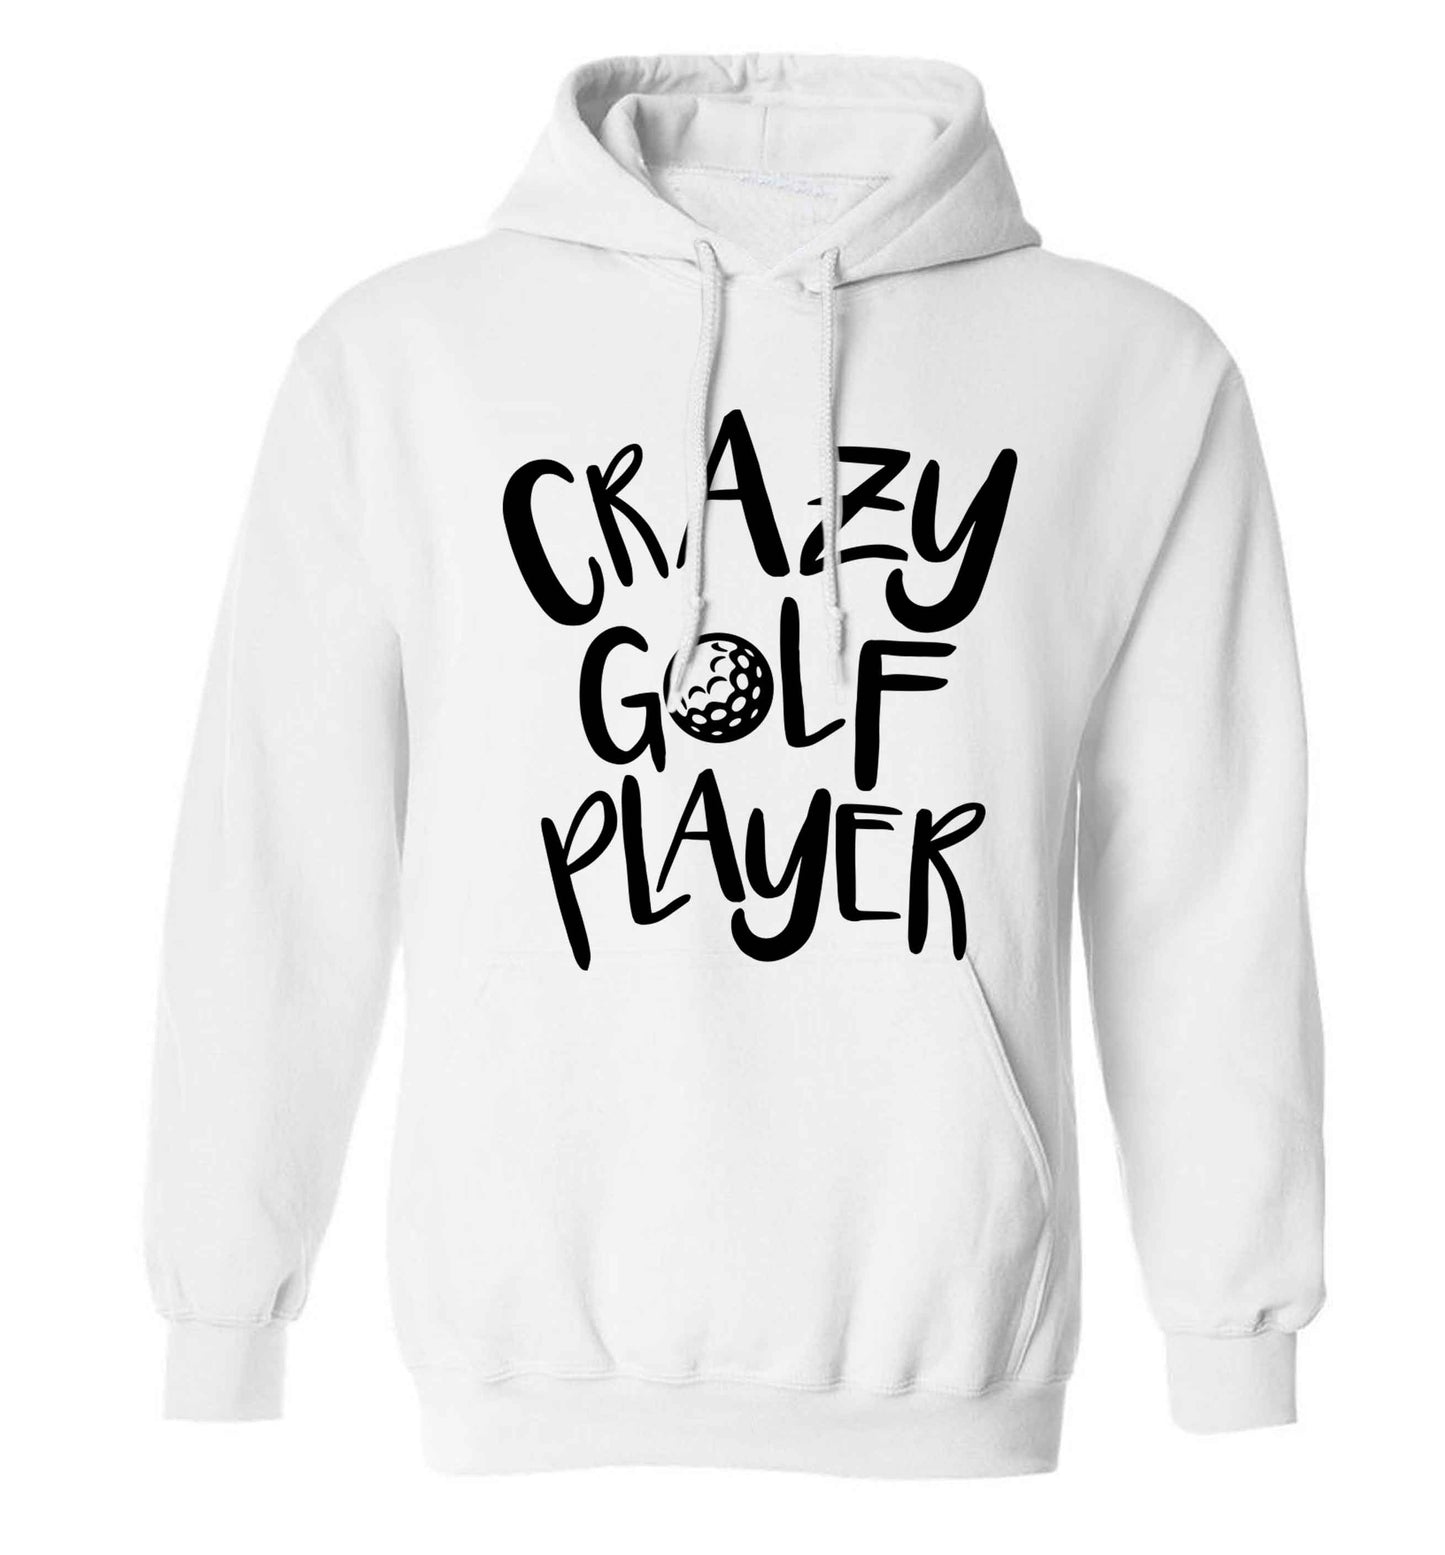 Crazy golf player adults unisex white hoodie 2XL